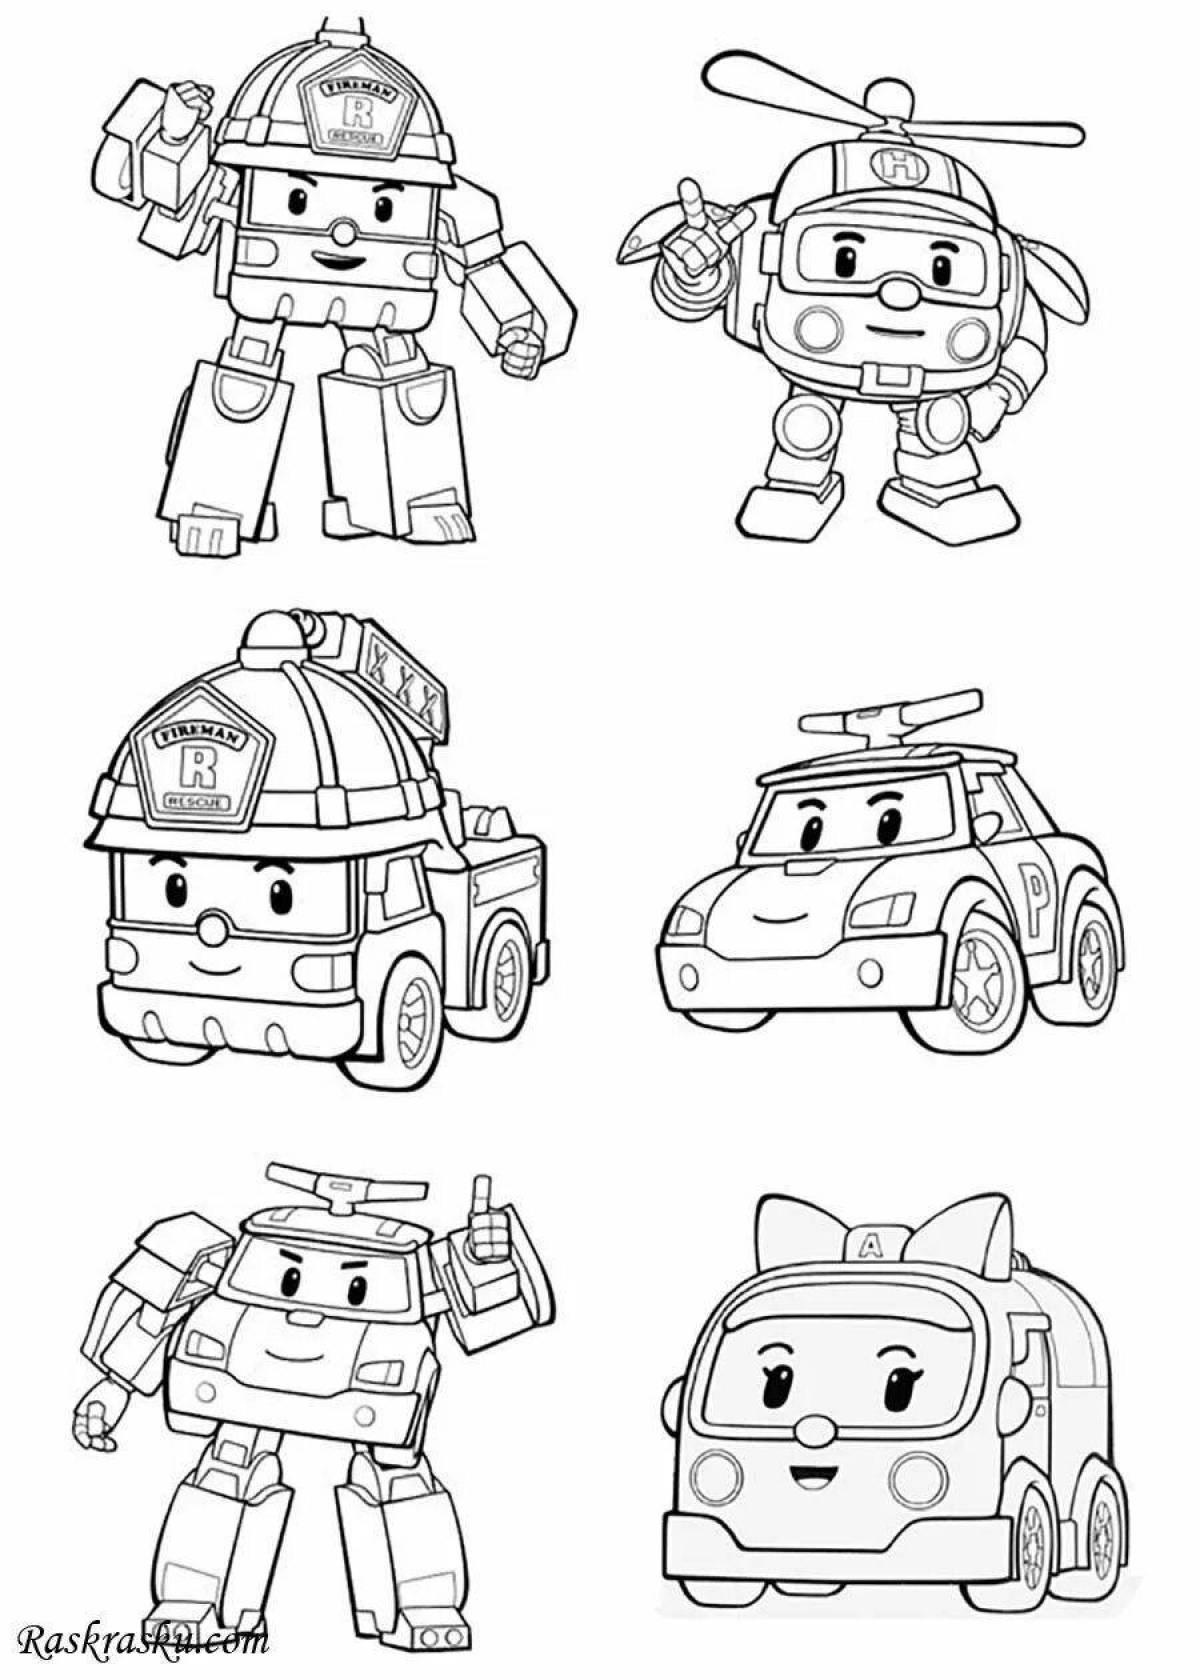 Ember funny car coloring page